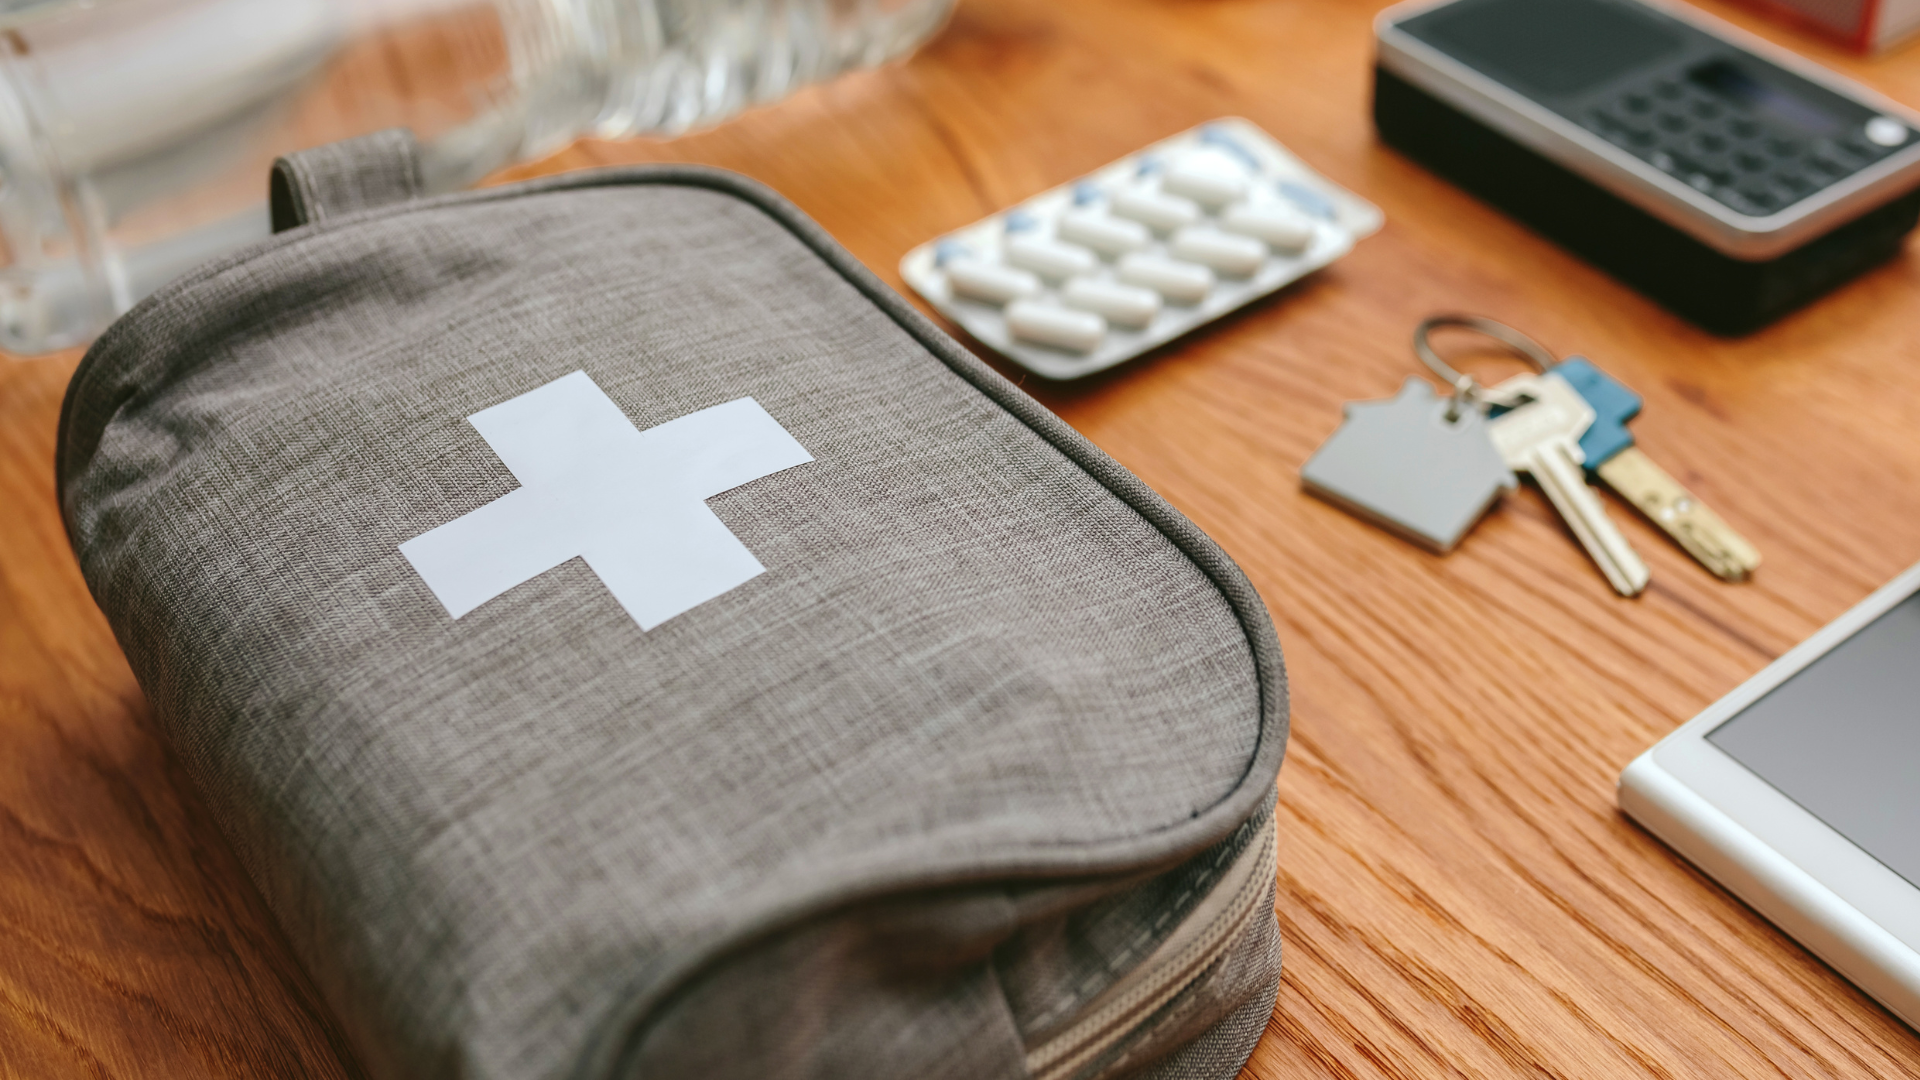 10 must-haves for your travel medical kit